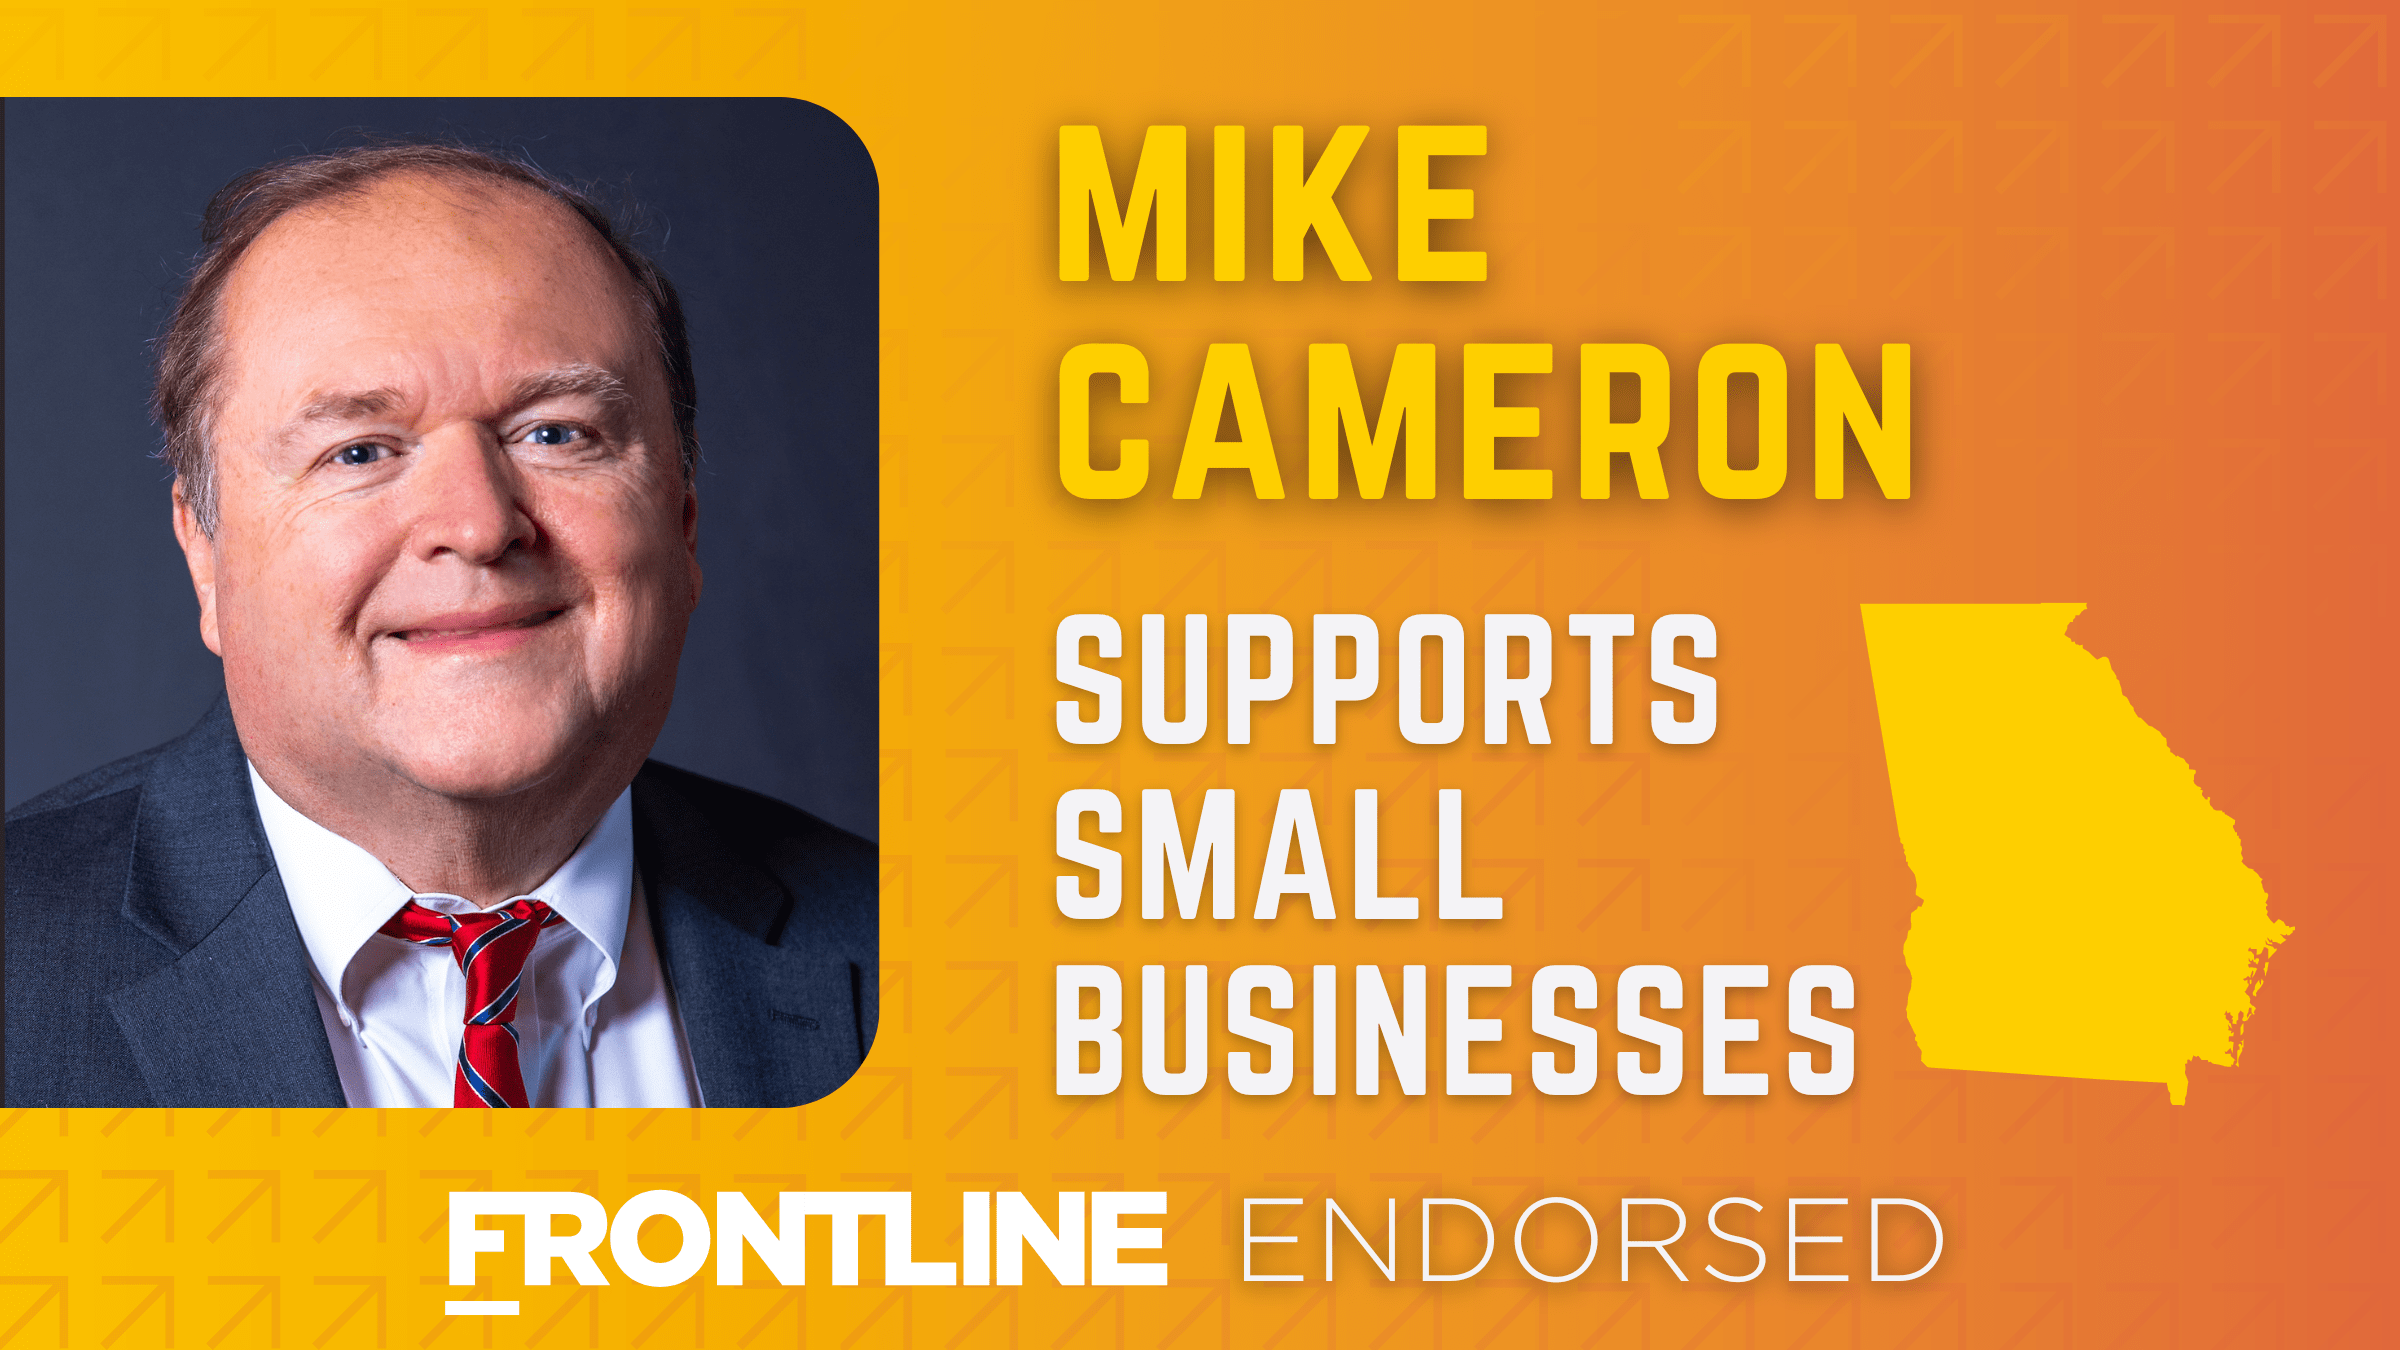 Reminder – Vote for Mike Cameron for State House District 1